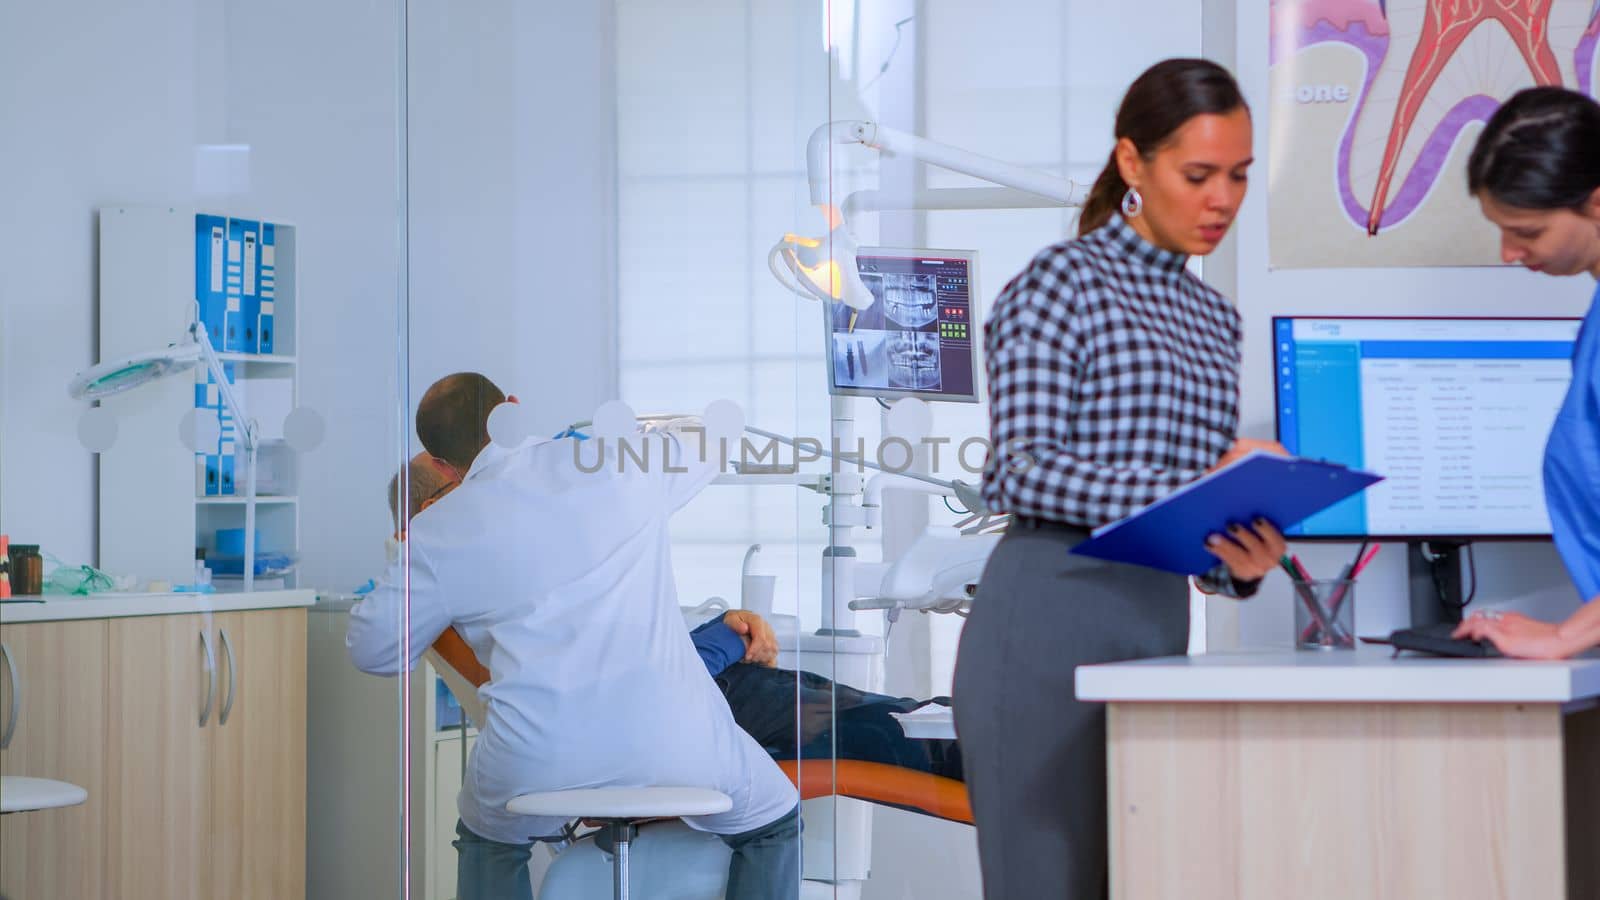 Patients asking for help filling in dental registration form preparing for exemination. Senior woman sitting on chair in waiting area of crowded orthodontist office while doctor working in background